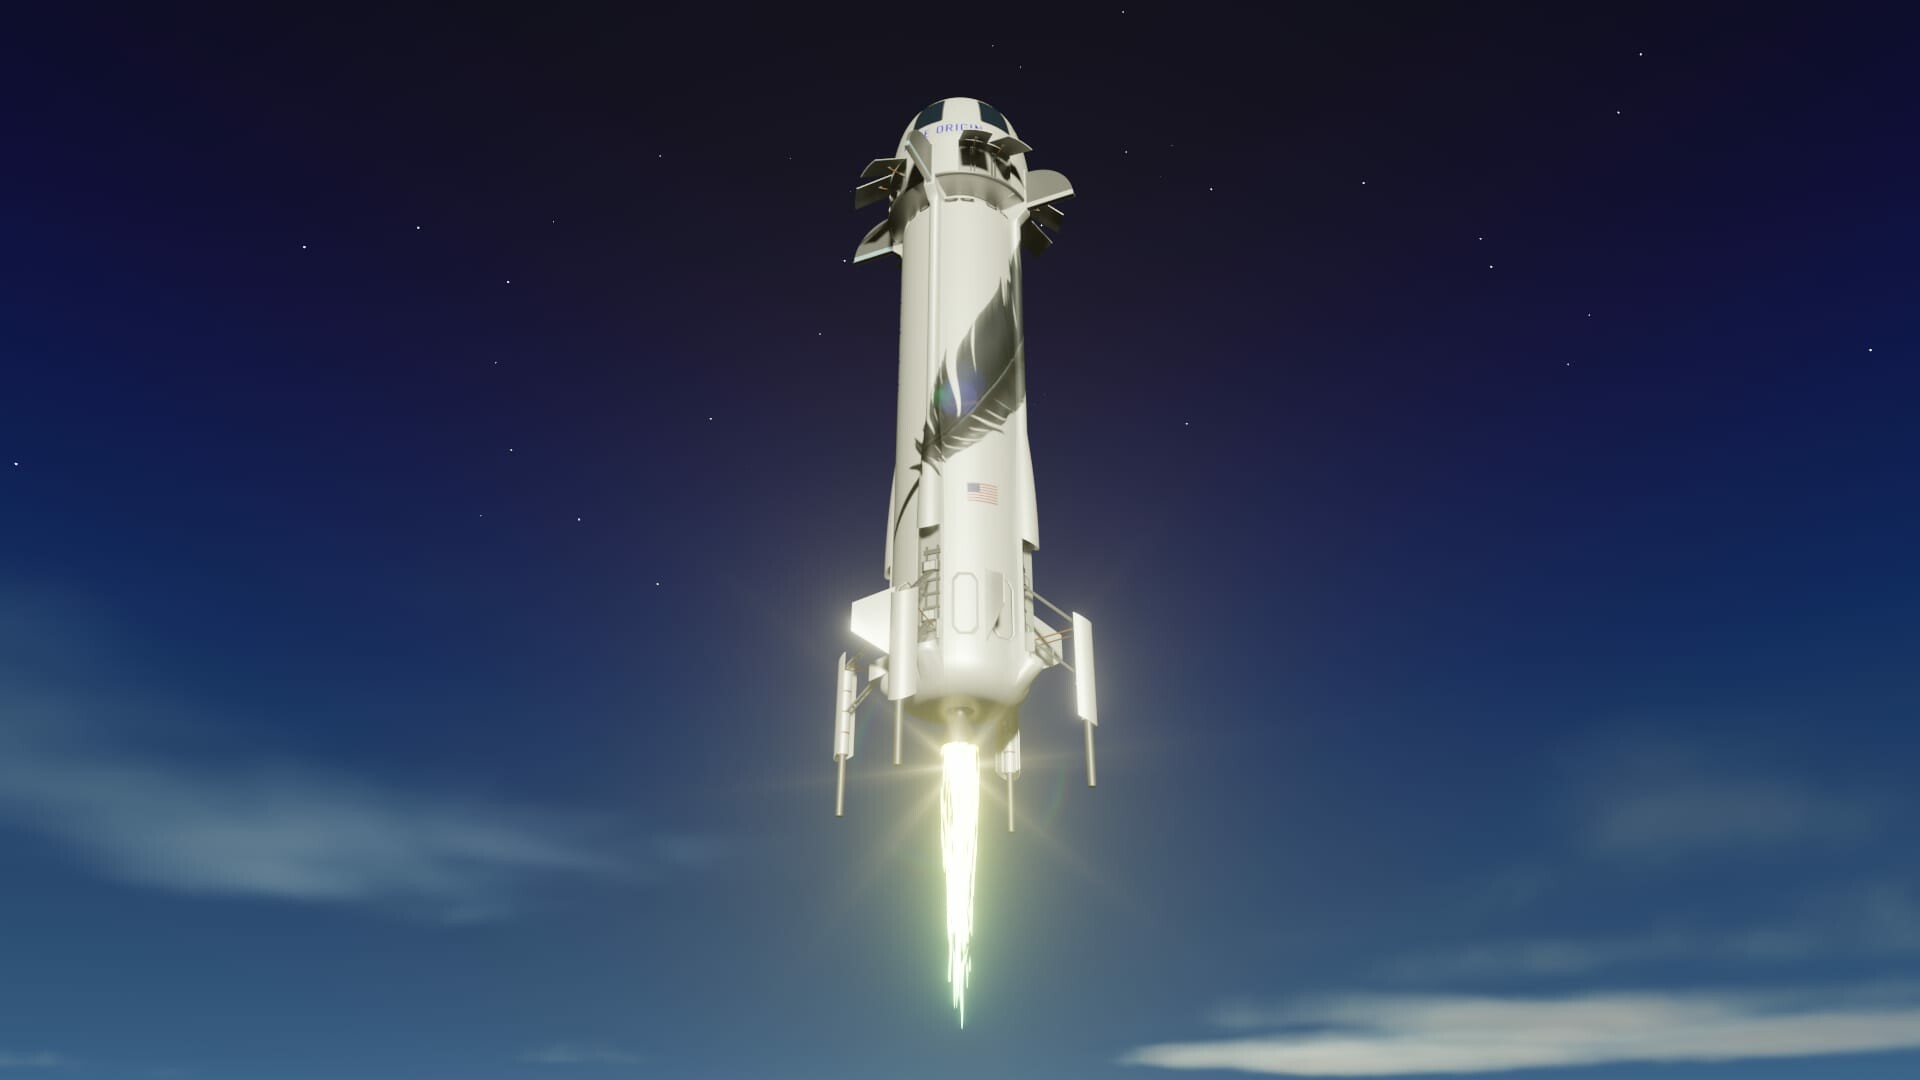 Blue Origin: New Shepard, A fully reusable suborbital launch vehicle developed for space tourism. 1920x1080 Full HD Background.